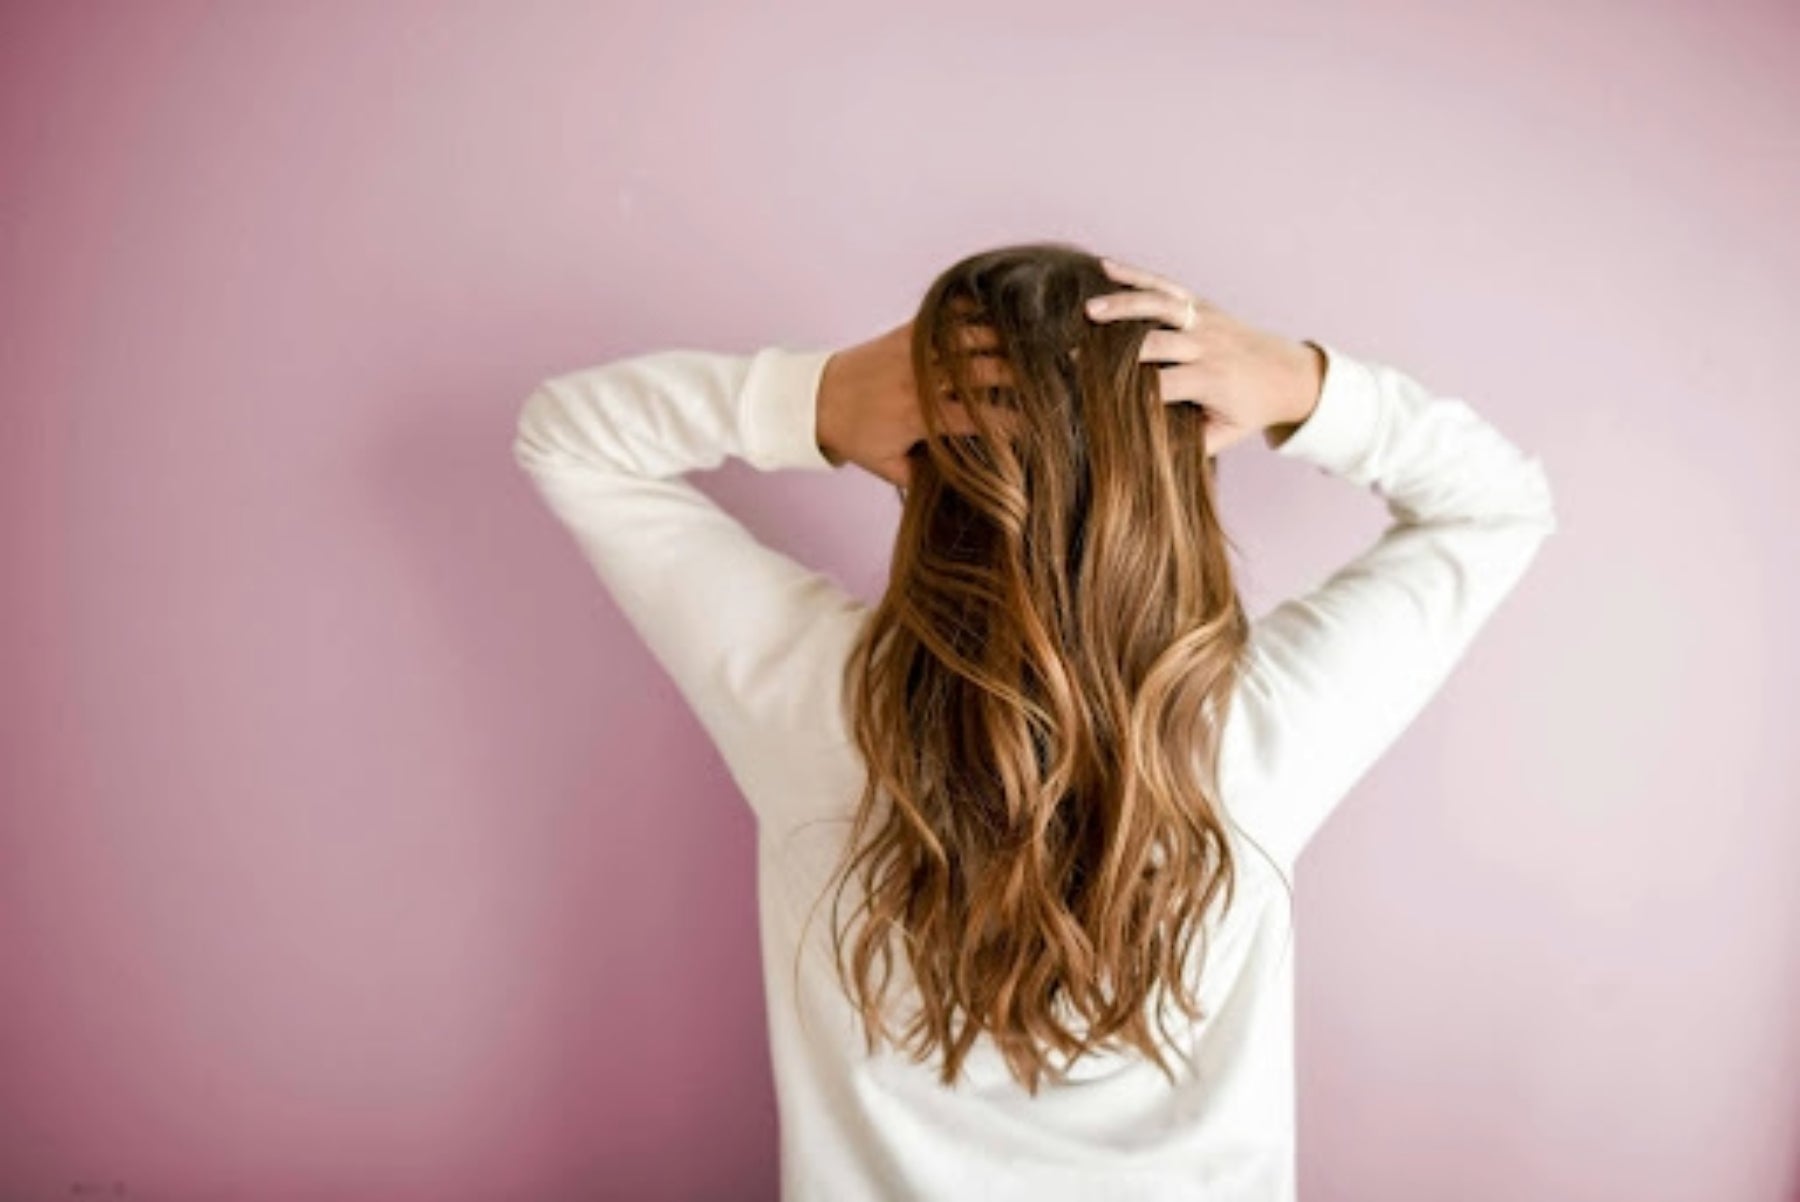 Image of a girl with long blonde hair flowing down her back. Taken from Pexels